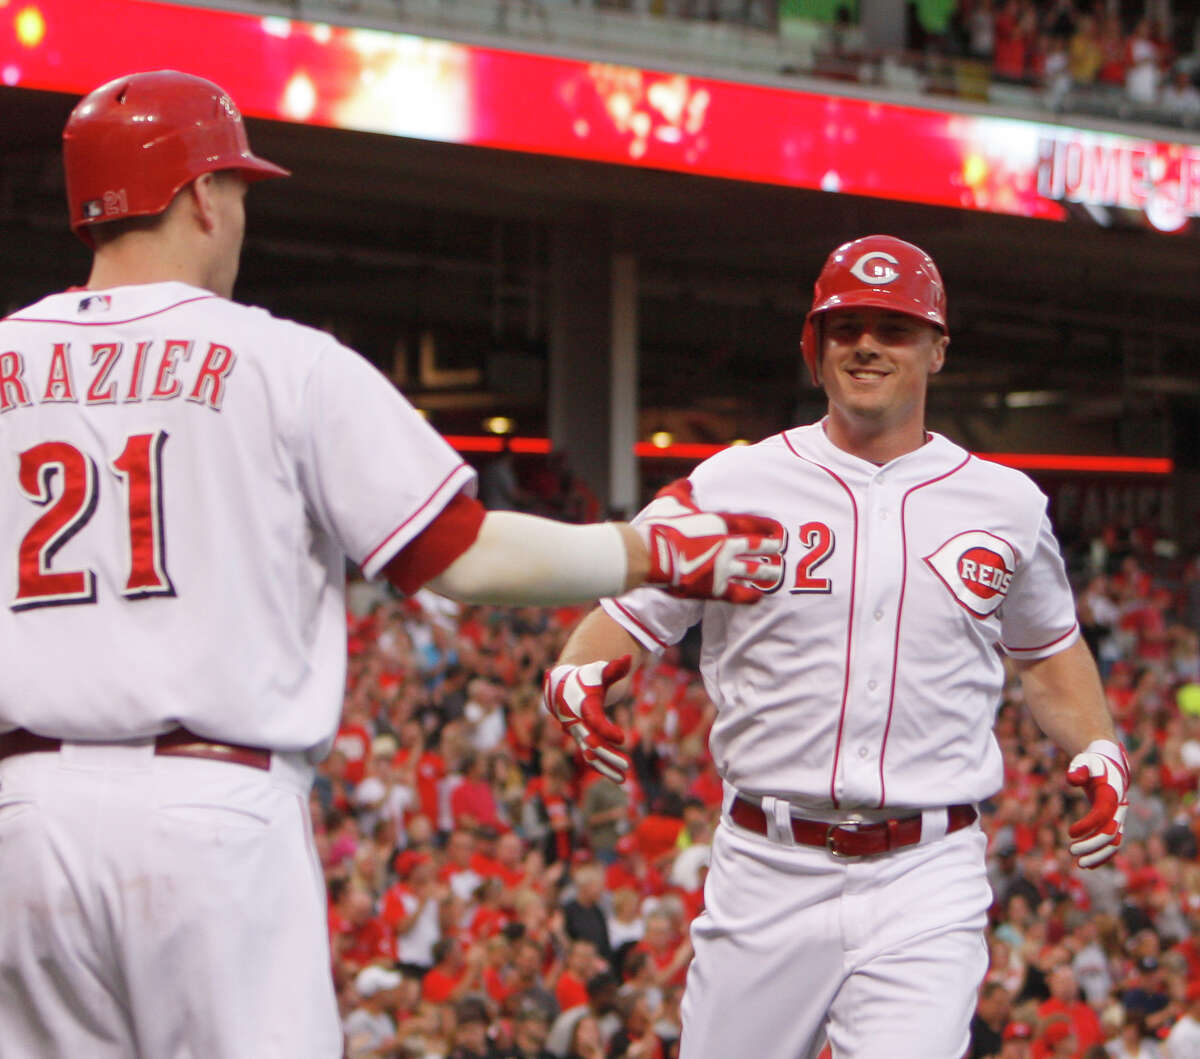 Cincinnati Reds' Jay Bruce (32) is congratulated by teammate Todd Frazier (21) after hitting a solo home run off Houston Astros starting pitcher Bud Norris in the second inning during a baseball game on Saturday, Sept. 8, 2012, in Cincinnati. (AP Photo/David Kohl)